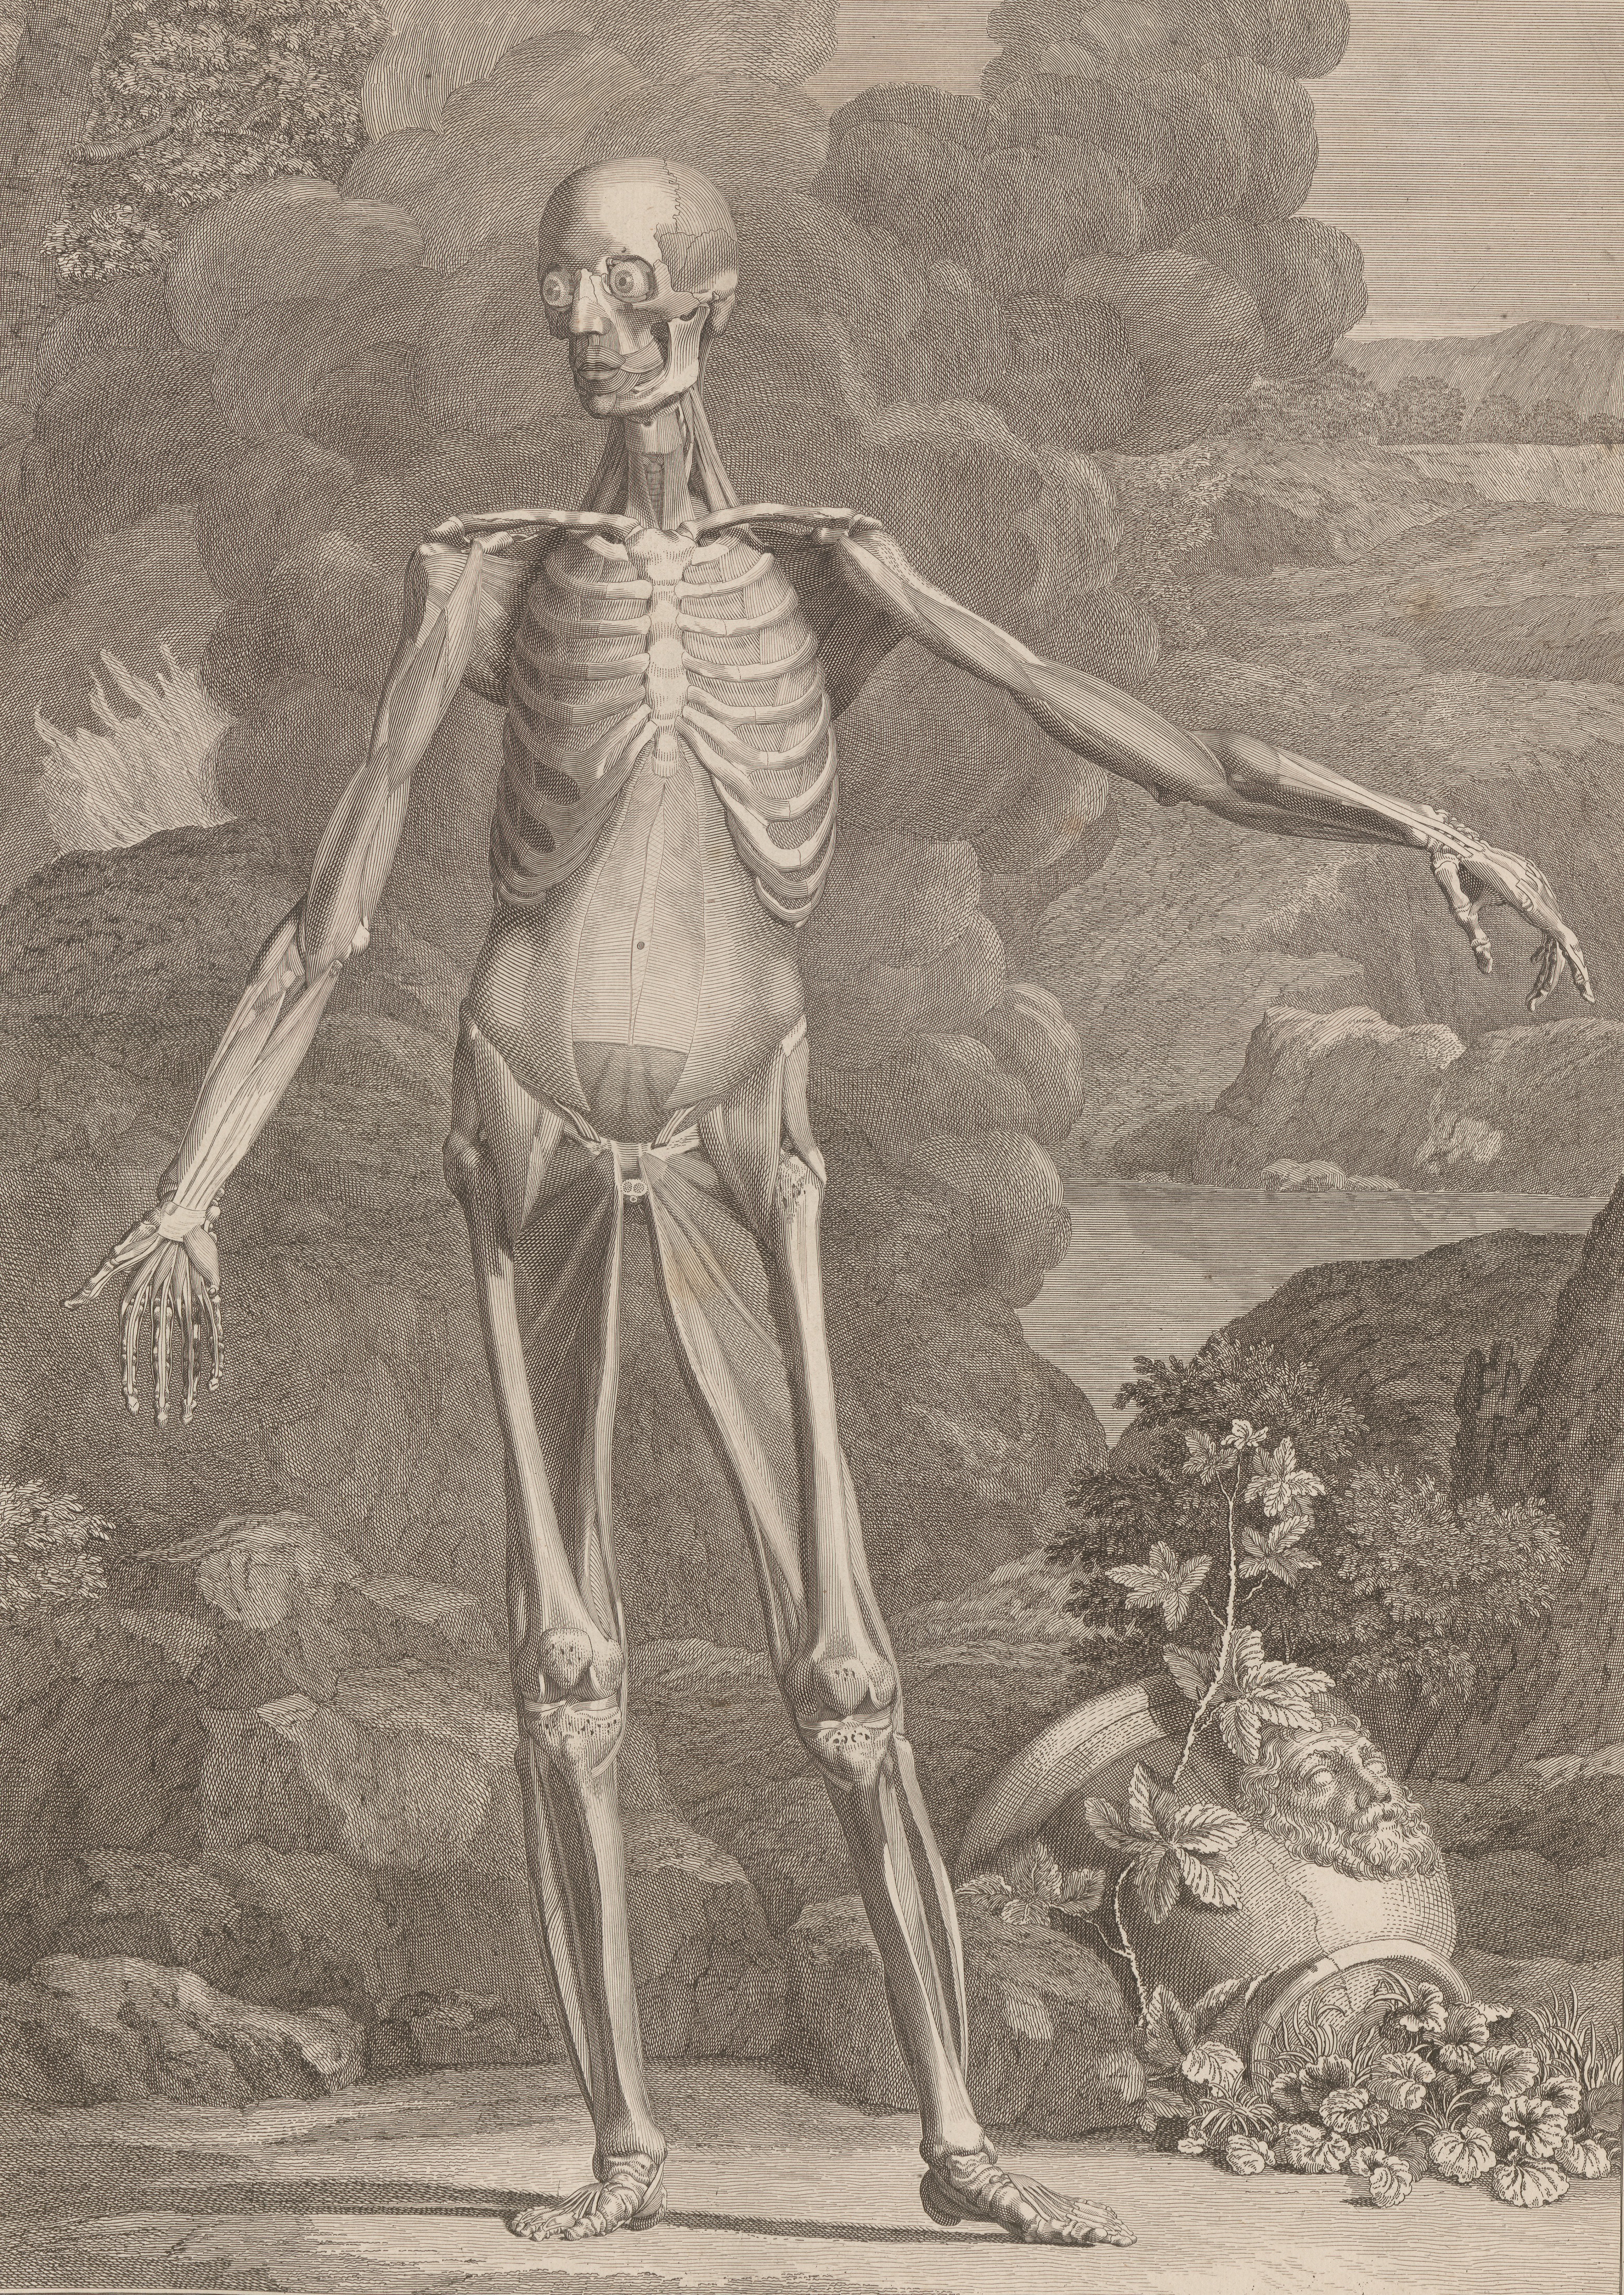 Bernhard Siegfried Albinus, Tables of the skeleton and muscles of the human body.  London: Printed by H. Woodfall for John and Paul Knapton, 1749. Rare Books (Brownless Medical Collection), University of Melbourne Library.